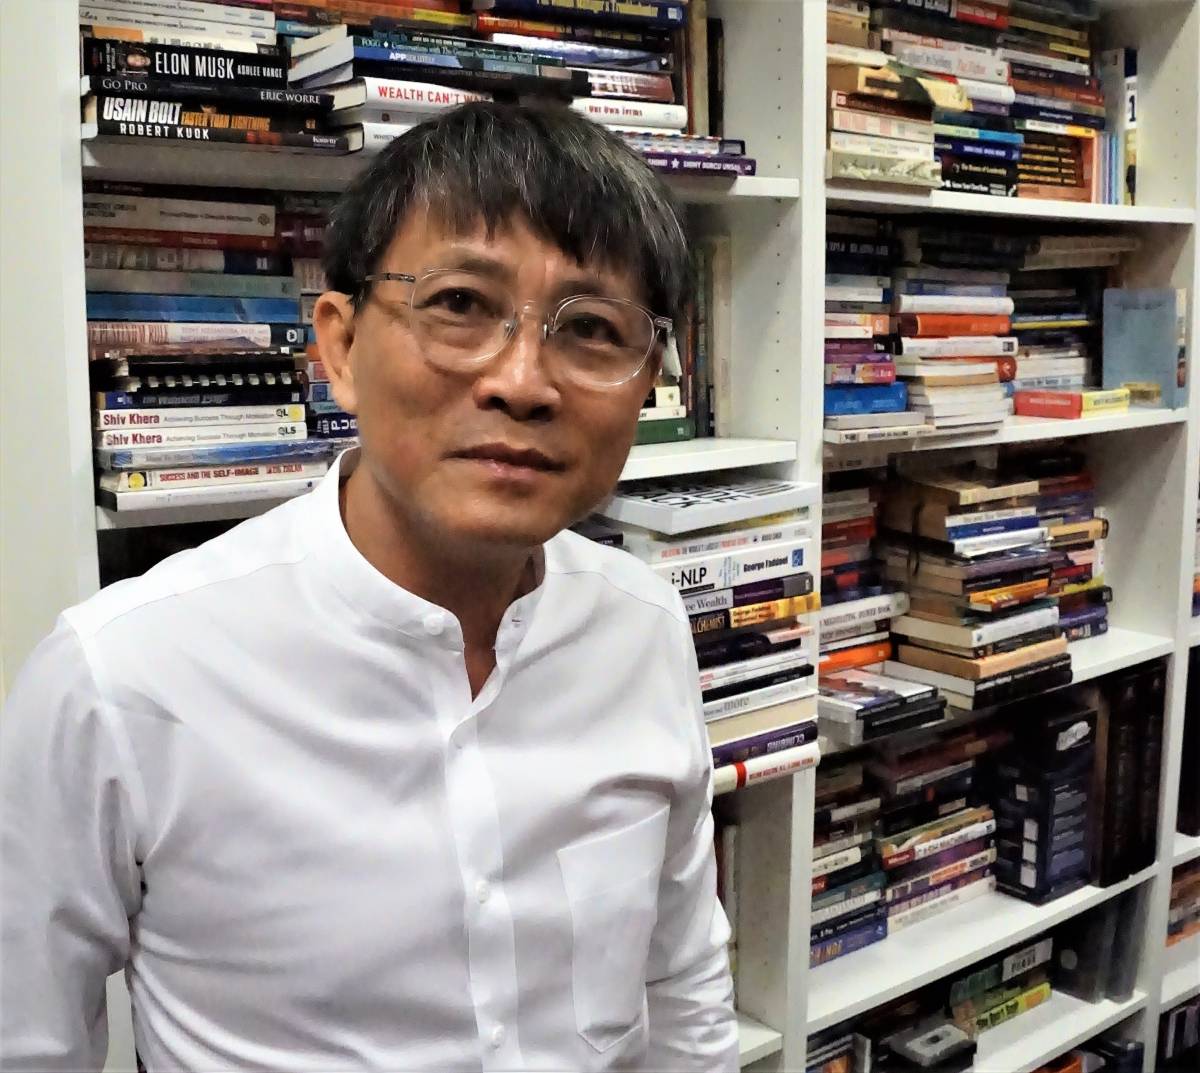 RICHARD TAN SUCCESSFULLY BUILDS SUCCESS RESOURCES